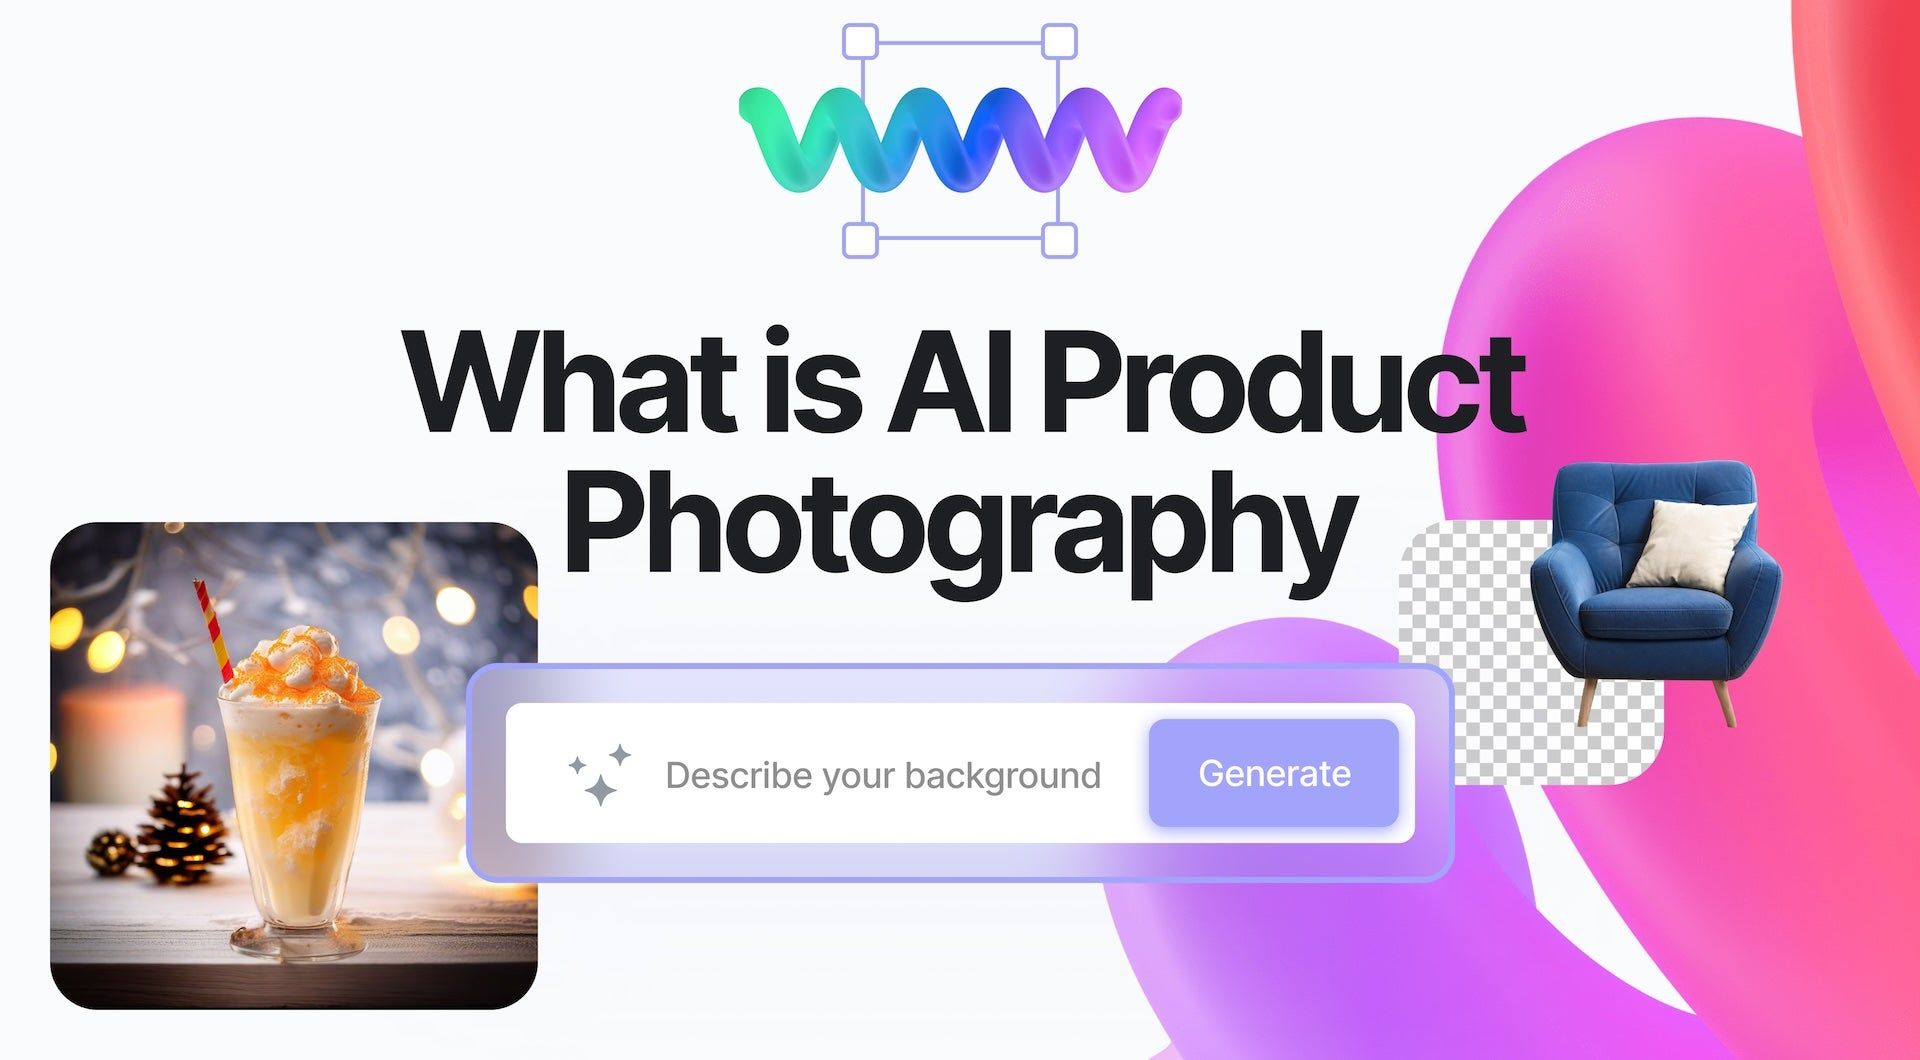 AI Product Photography for E-commerce: Important Things You Need to Know | Claid.ai